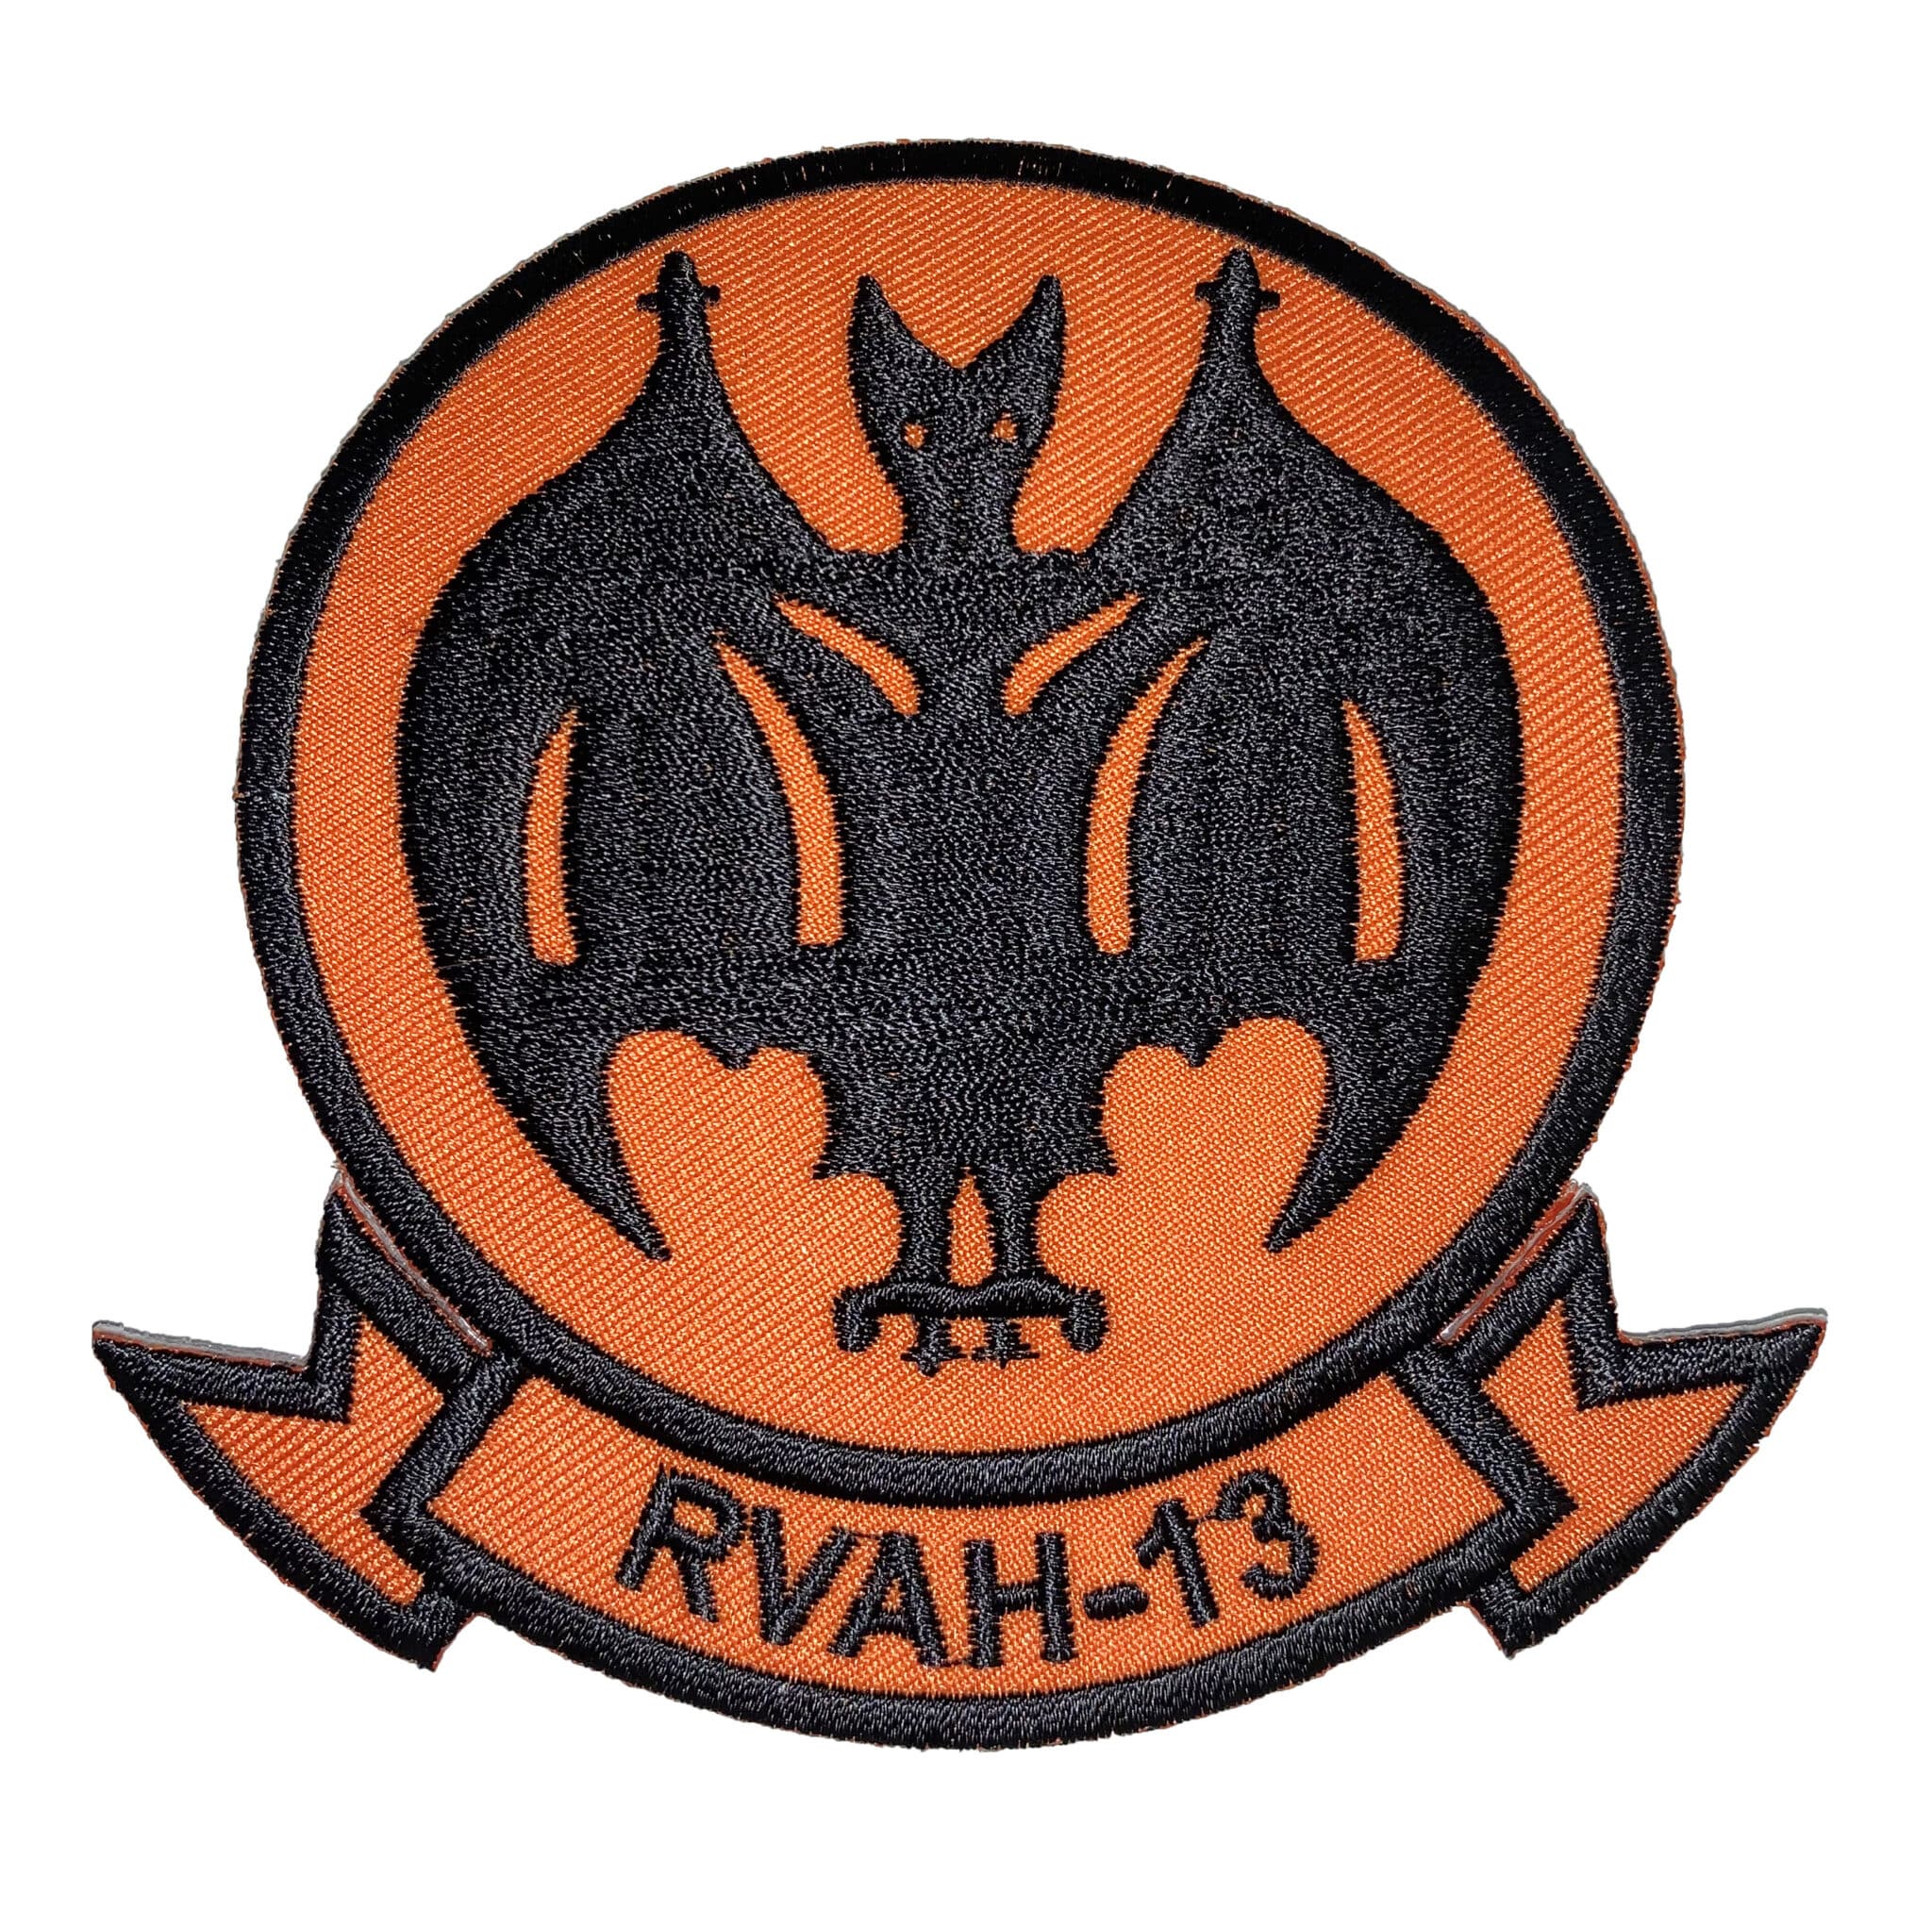 RVAH-13 Bats Squadron Patch – Sew On